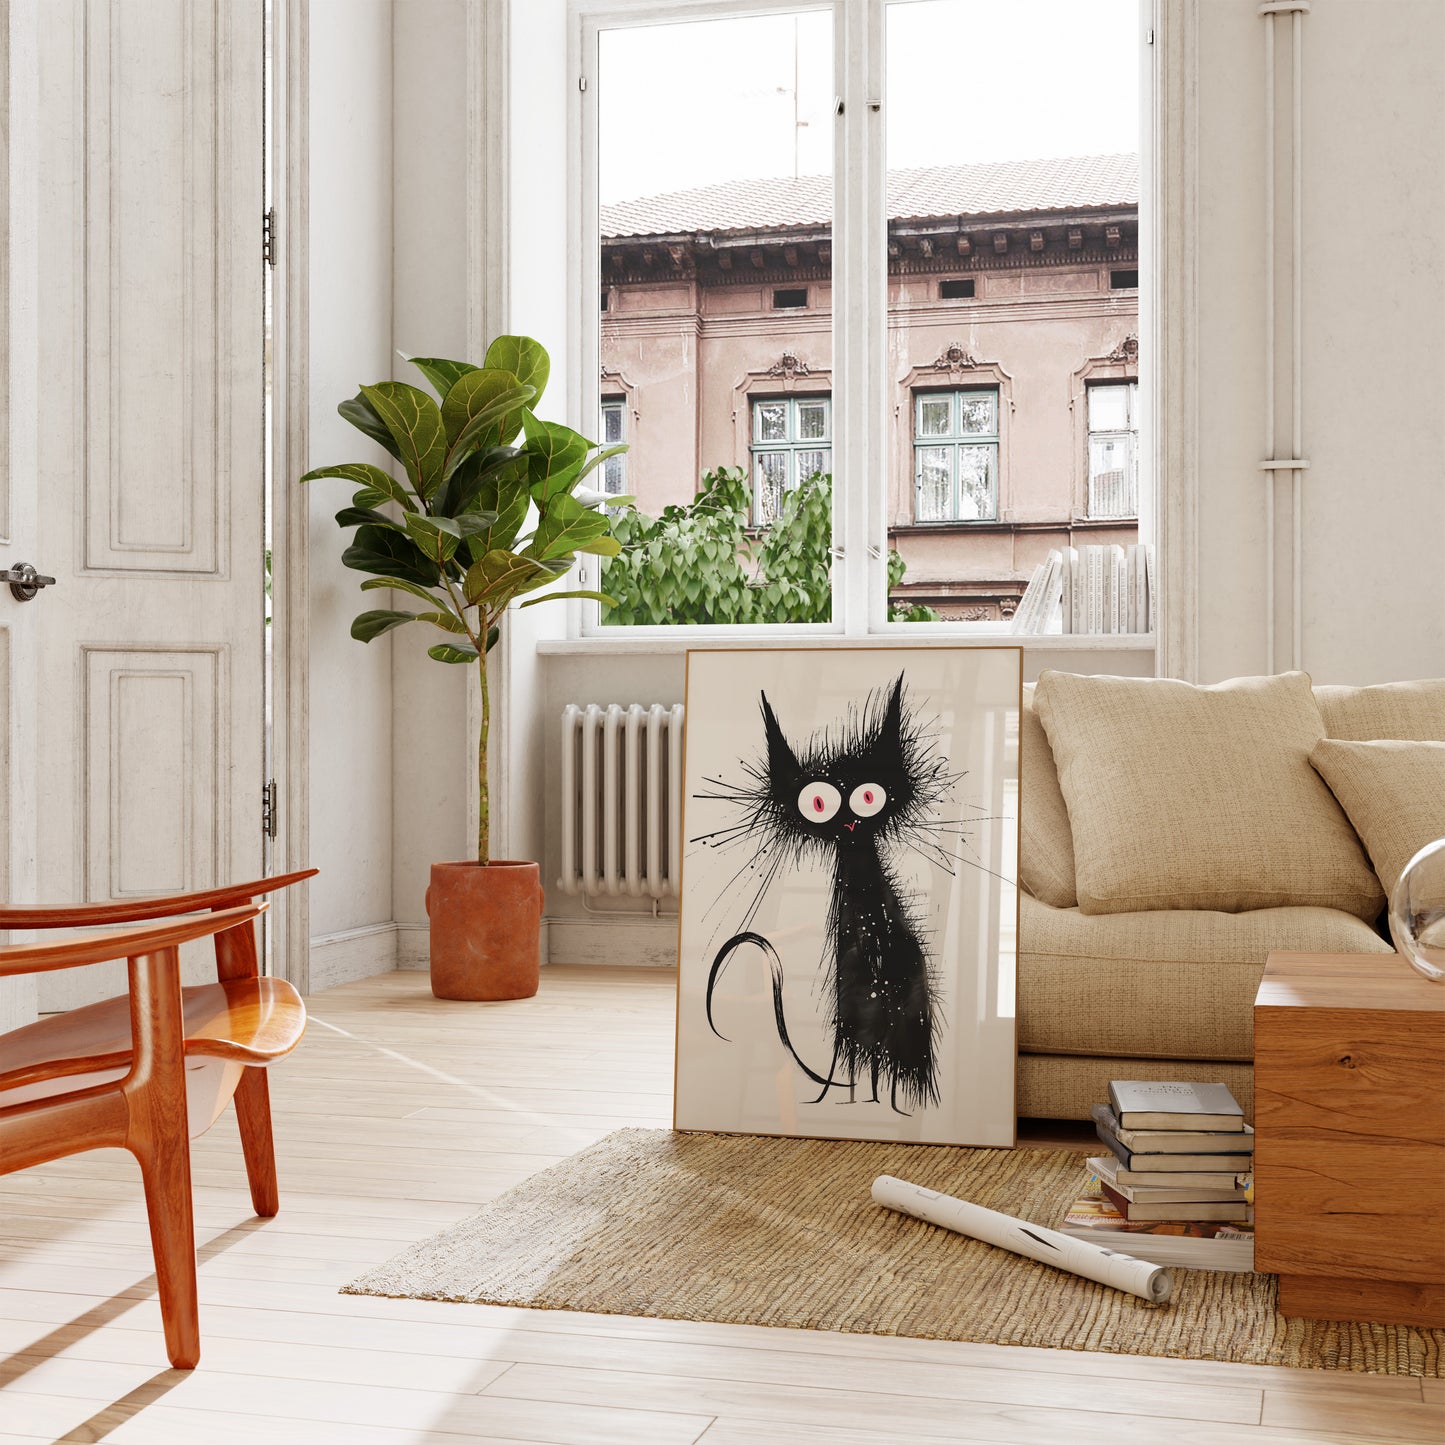 Modern living room with a quirky cat illustration leaning against the wall.